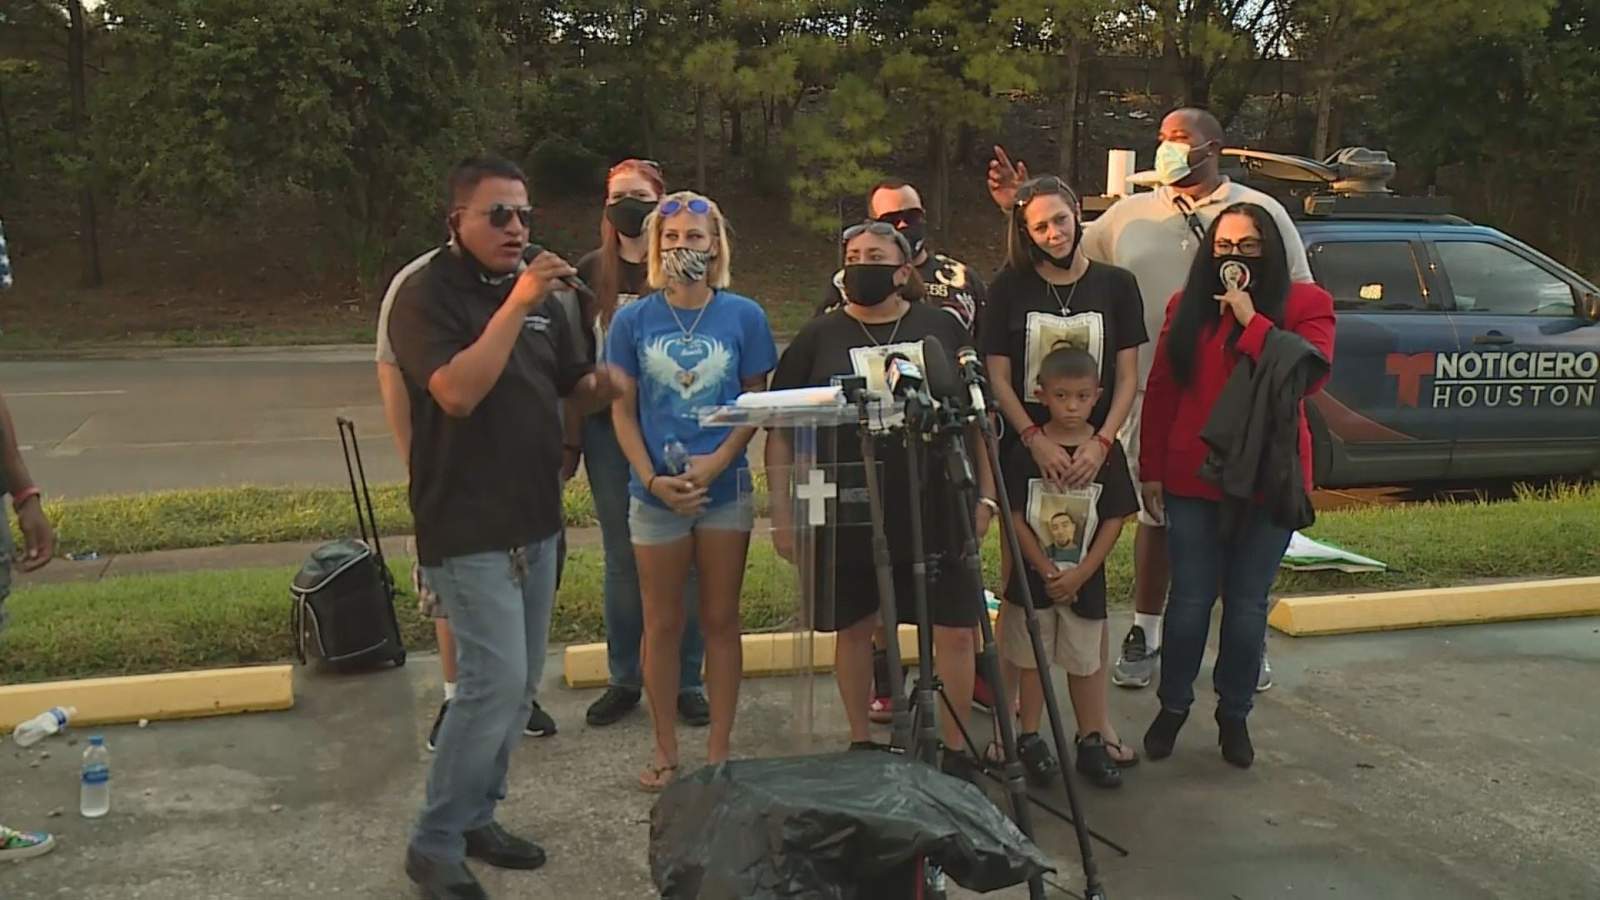 Community rallies to end police violence after deadly shooting of Nicolas Chavez